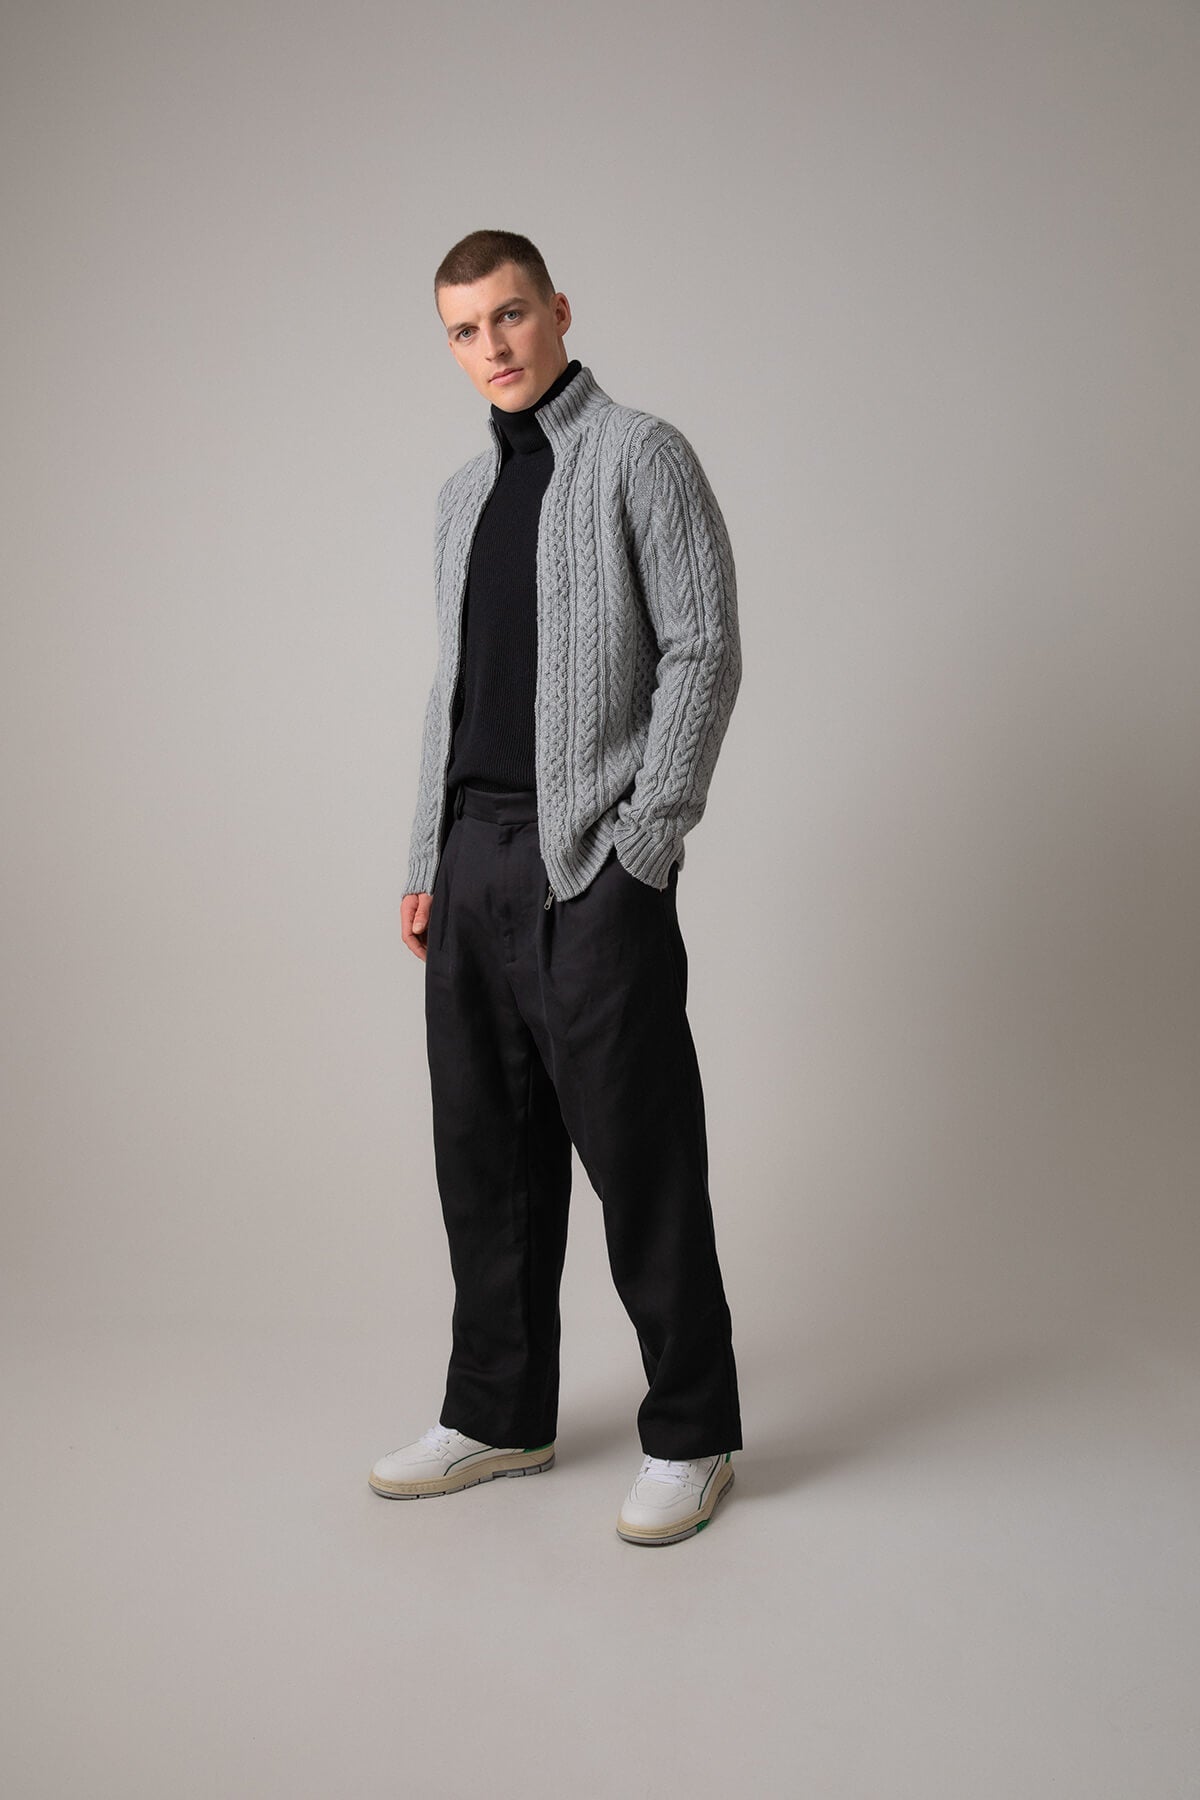 Johnstons of Elgin’s Men's Aran Cable Cashmere Zip Cardigan in Light Grey on model wearing black trousers on a grey background KAI05119Q23698